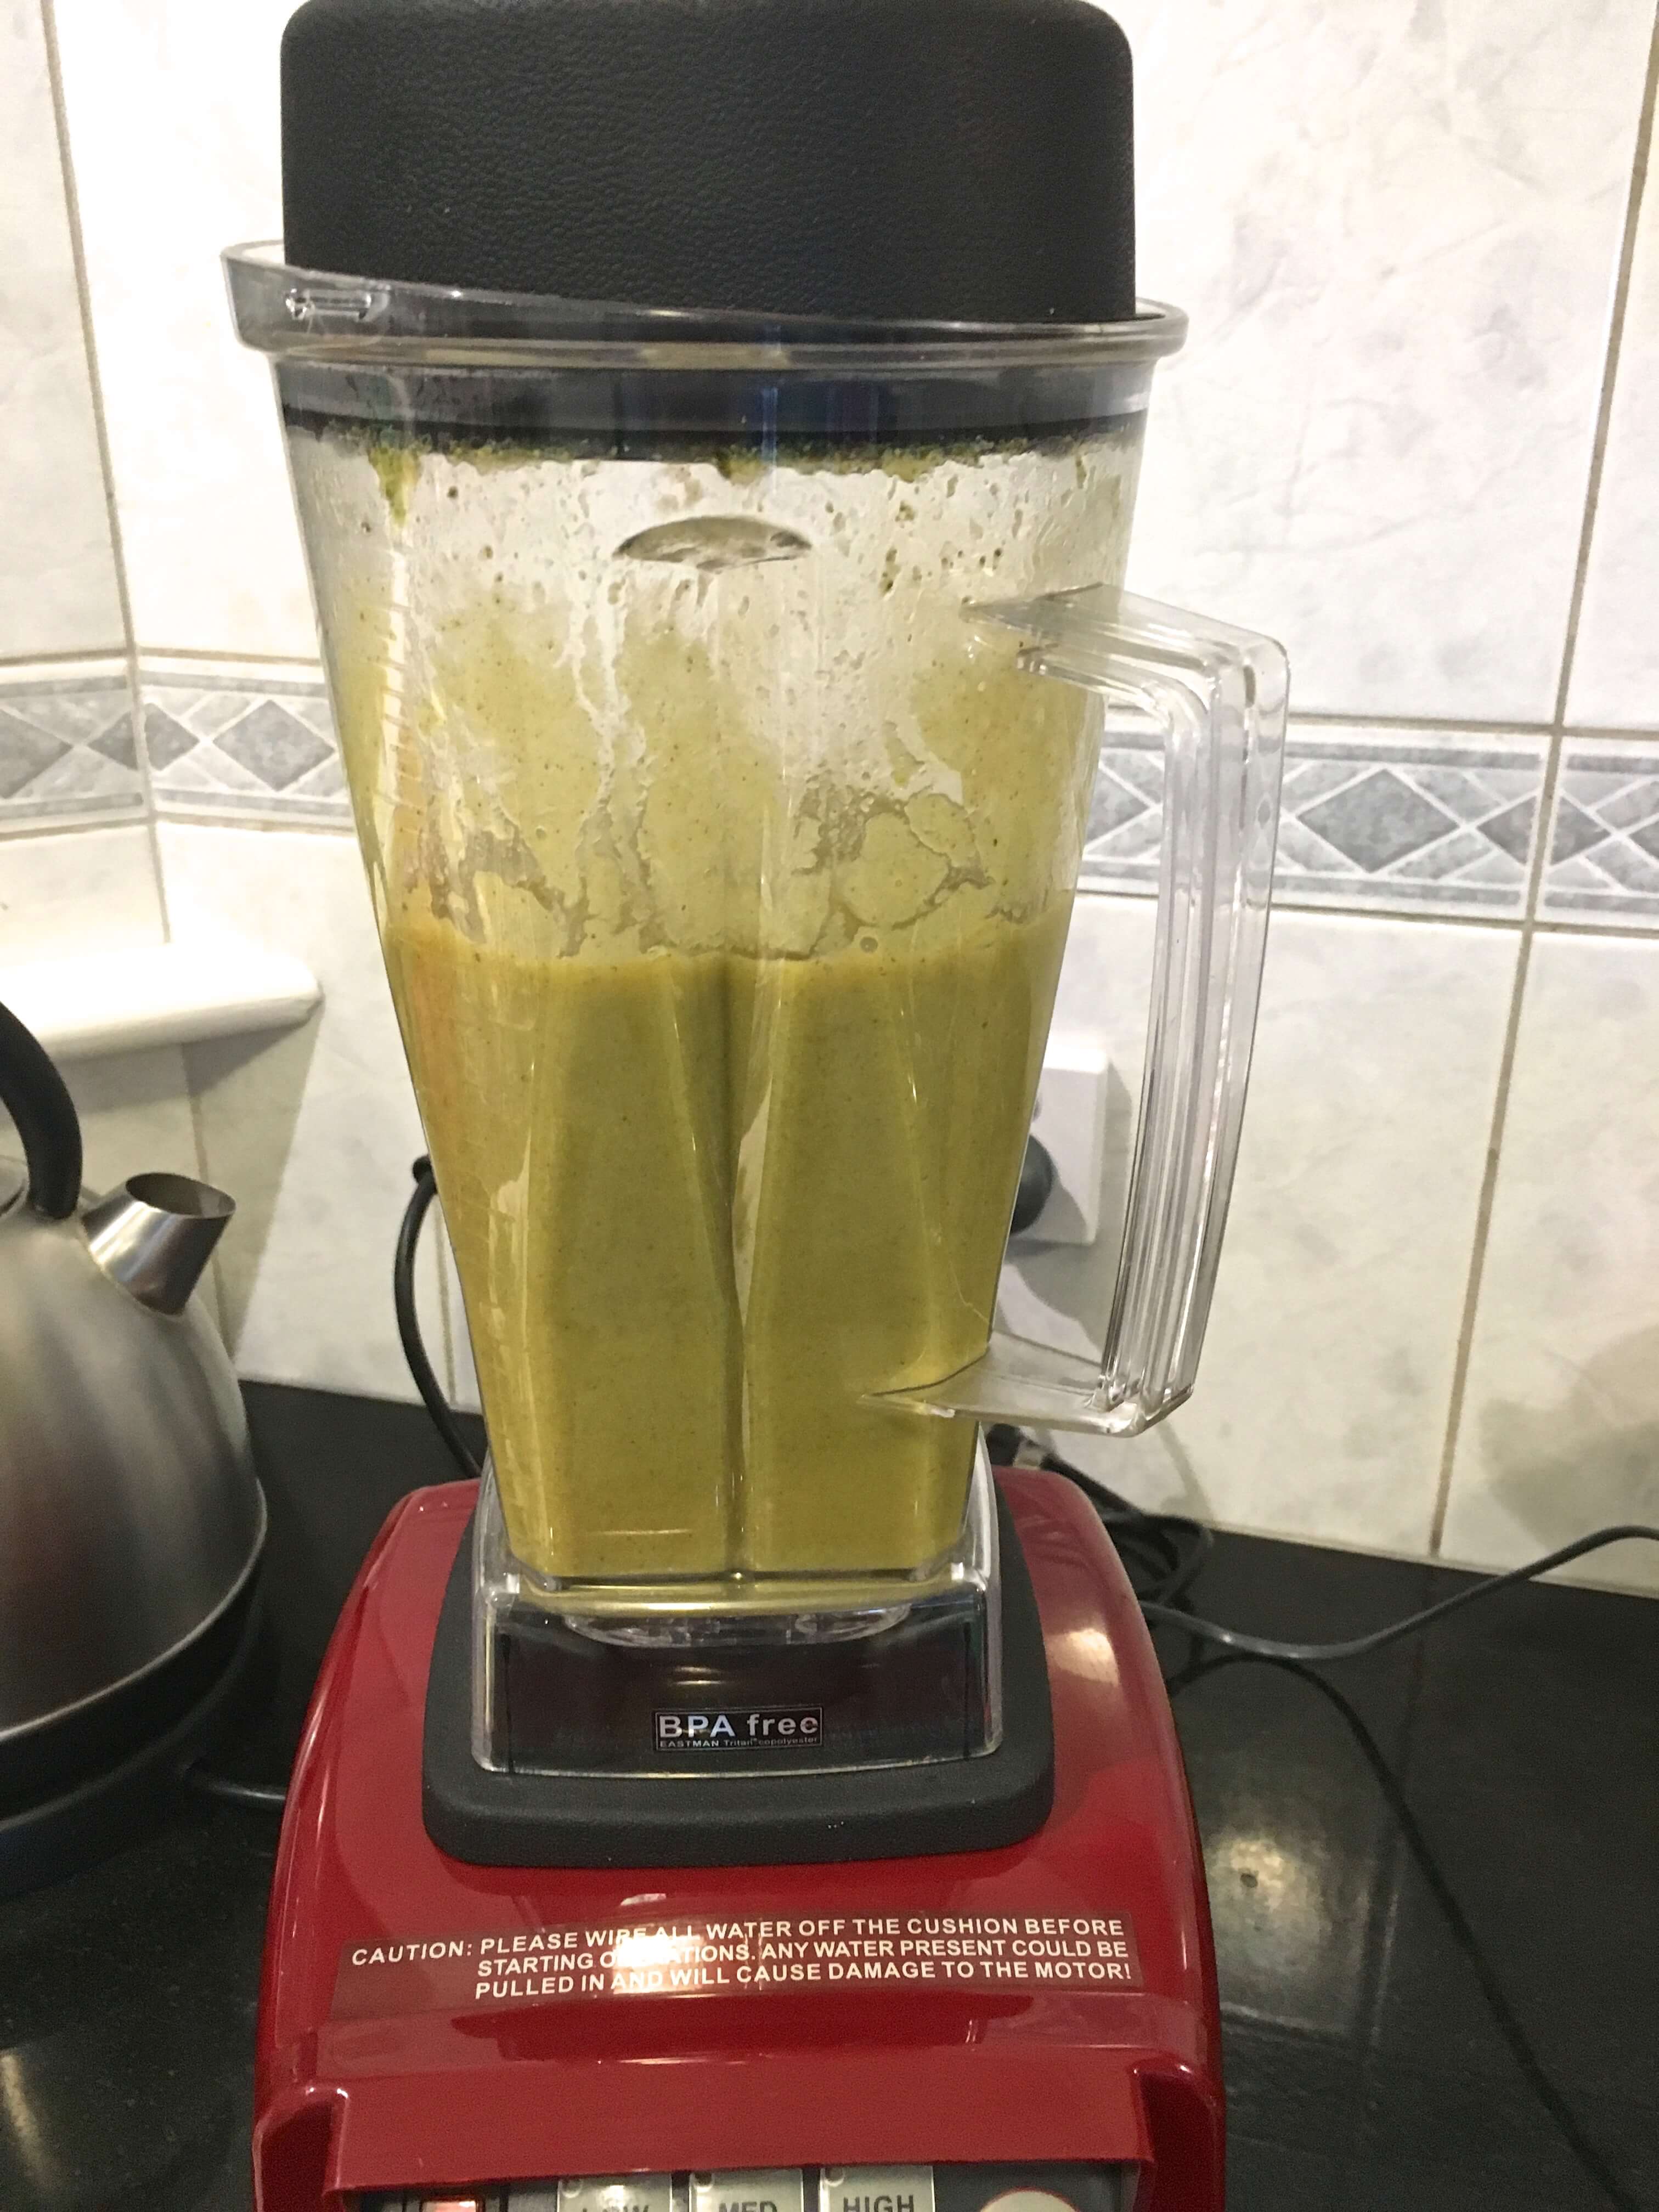 Broccoli and tomato soup in a blender